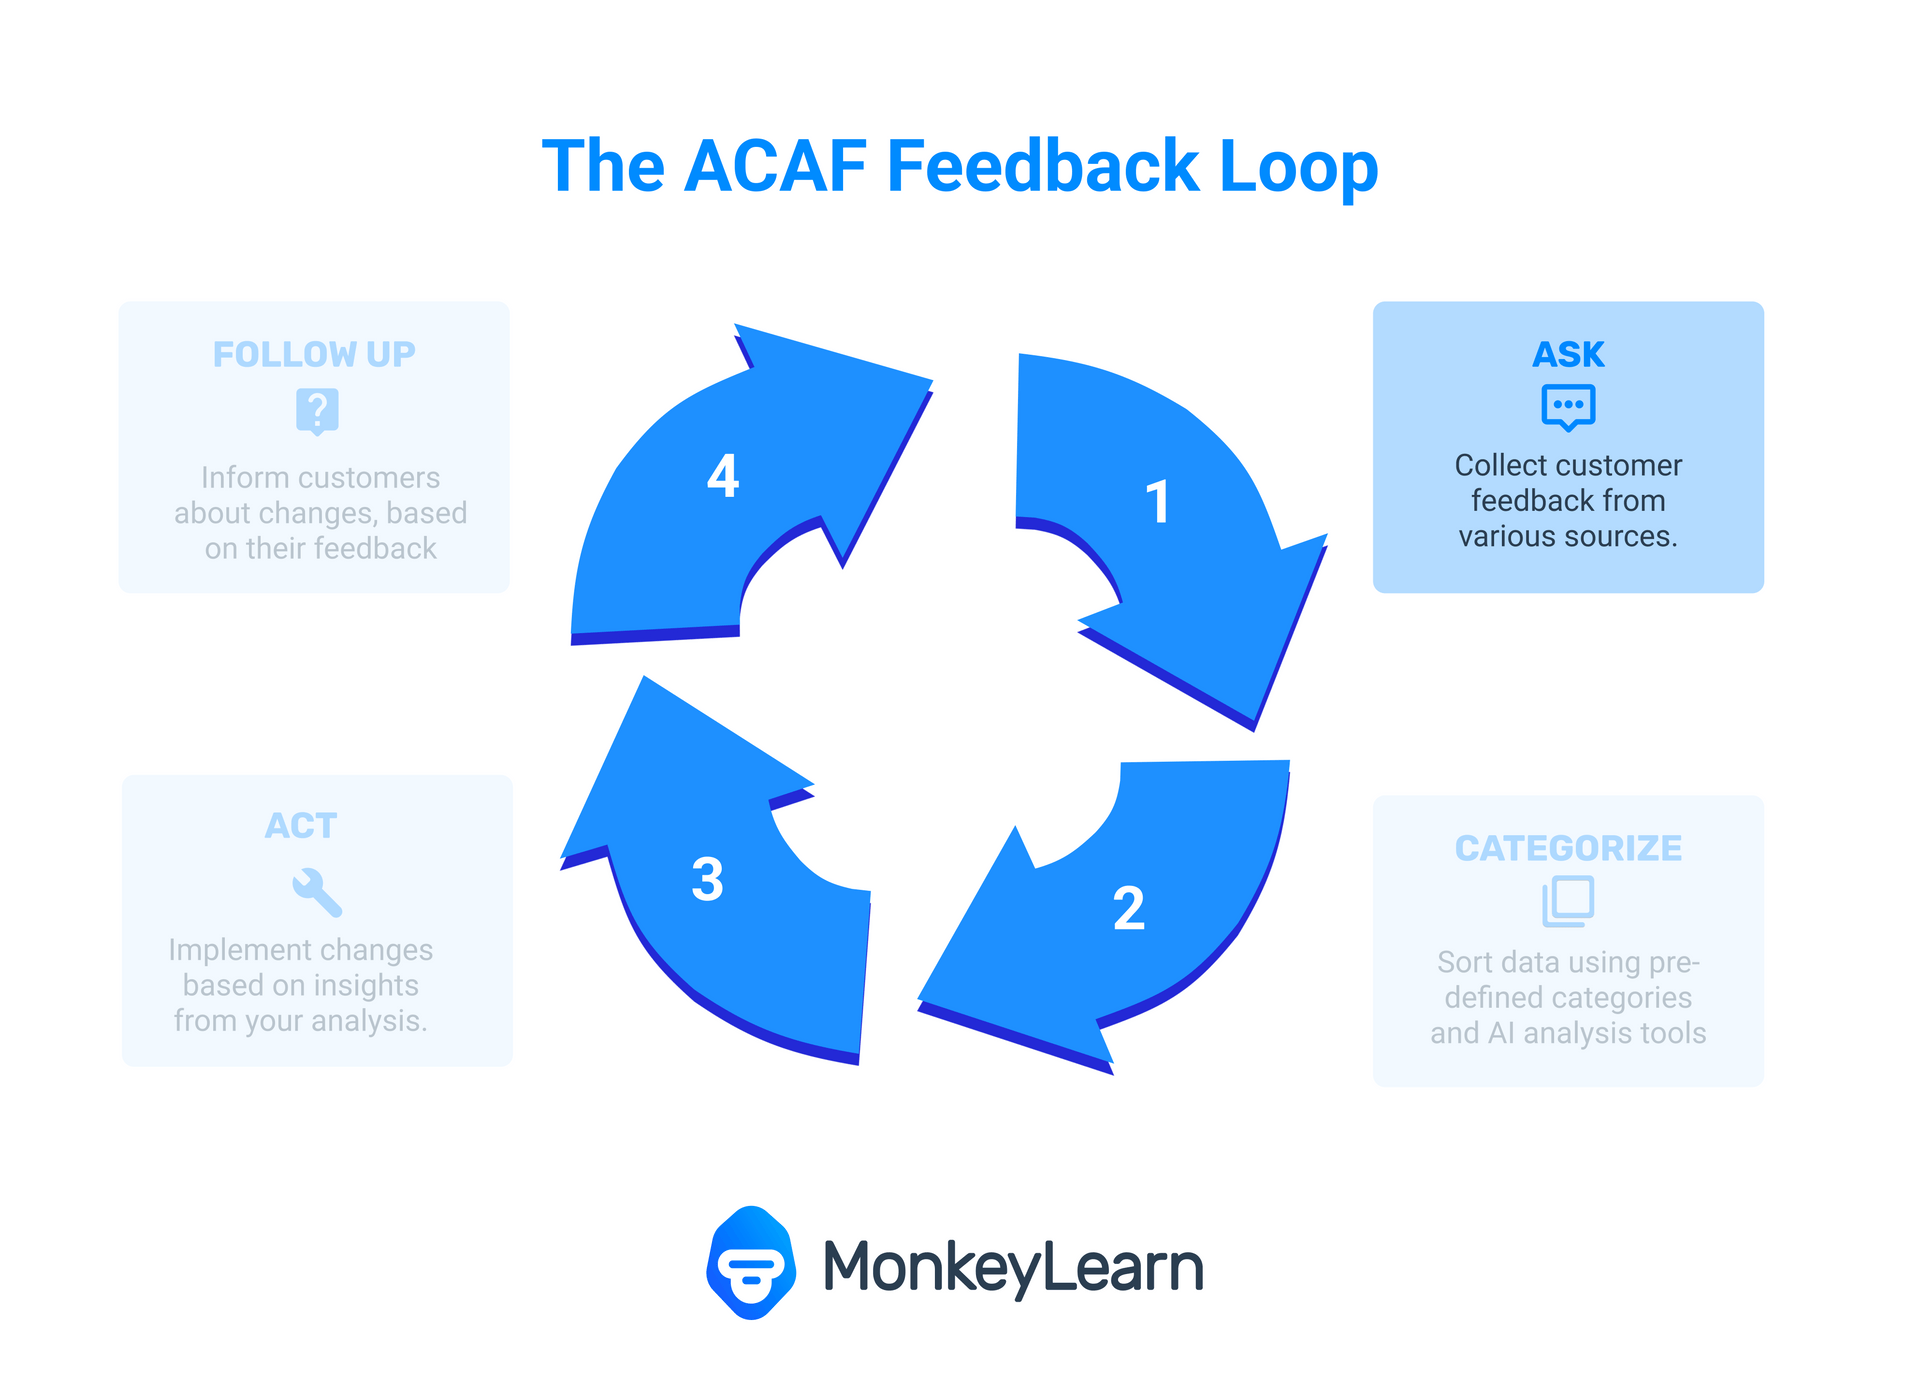 The ACAF Feedback loop depicted in four steps forming a circle: 'Ask' 'Categorize' 'Act' and 'Follow-Up'